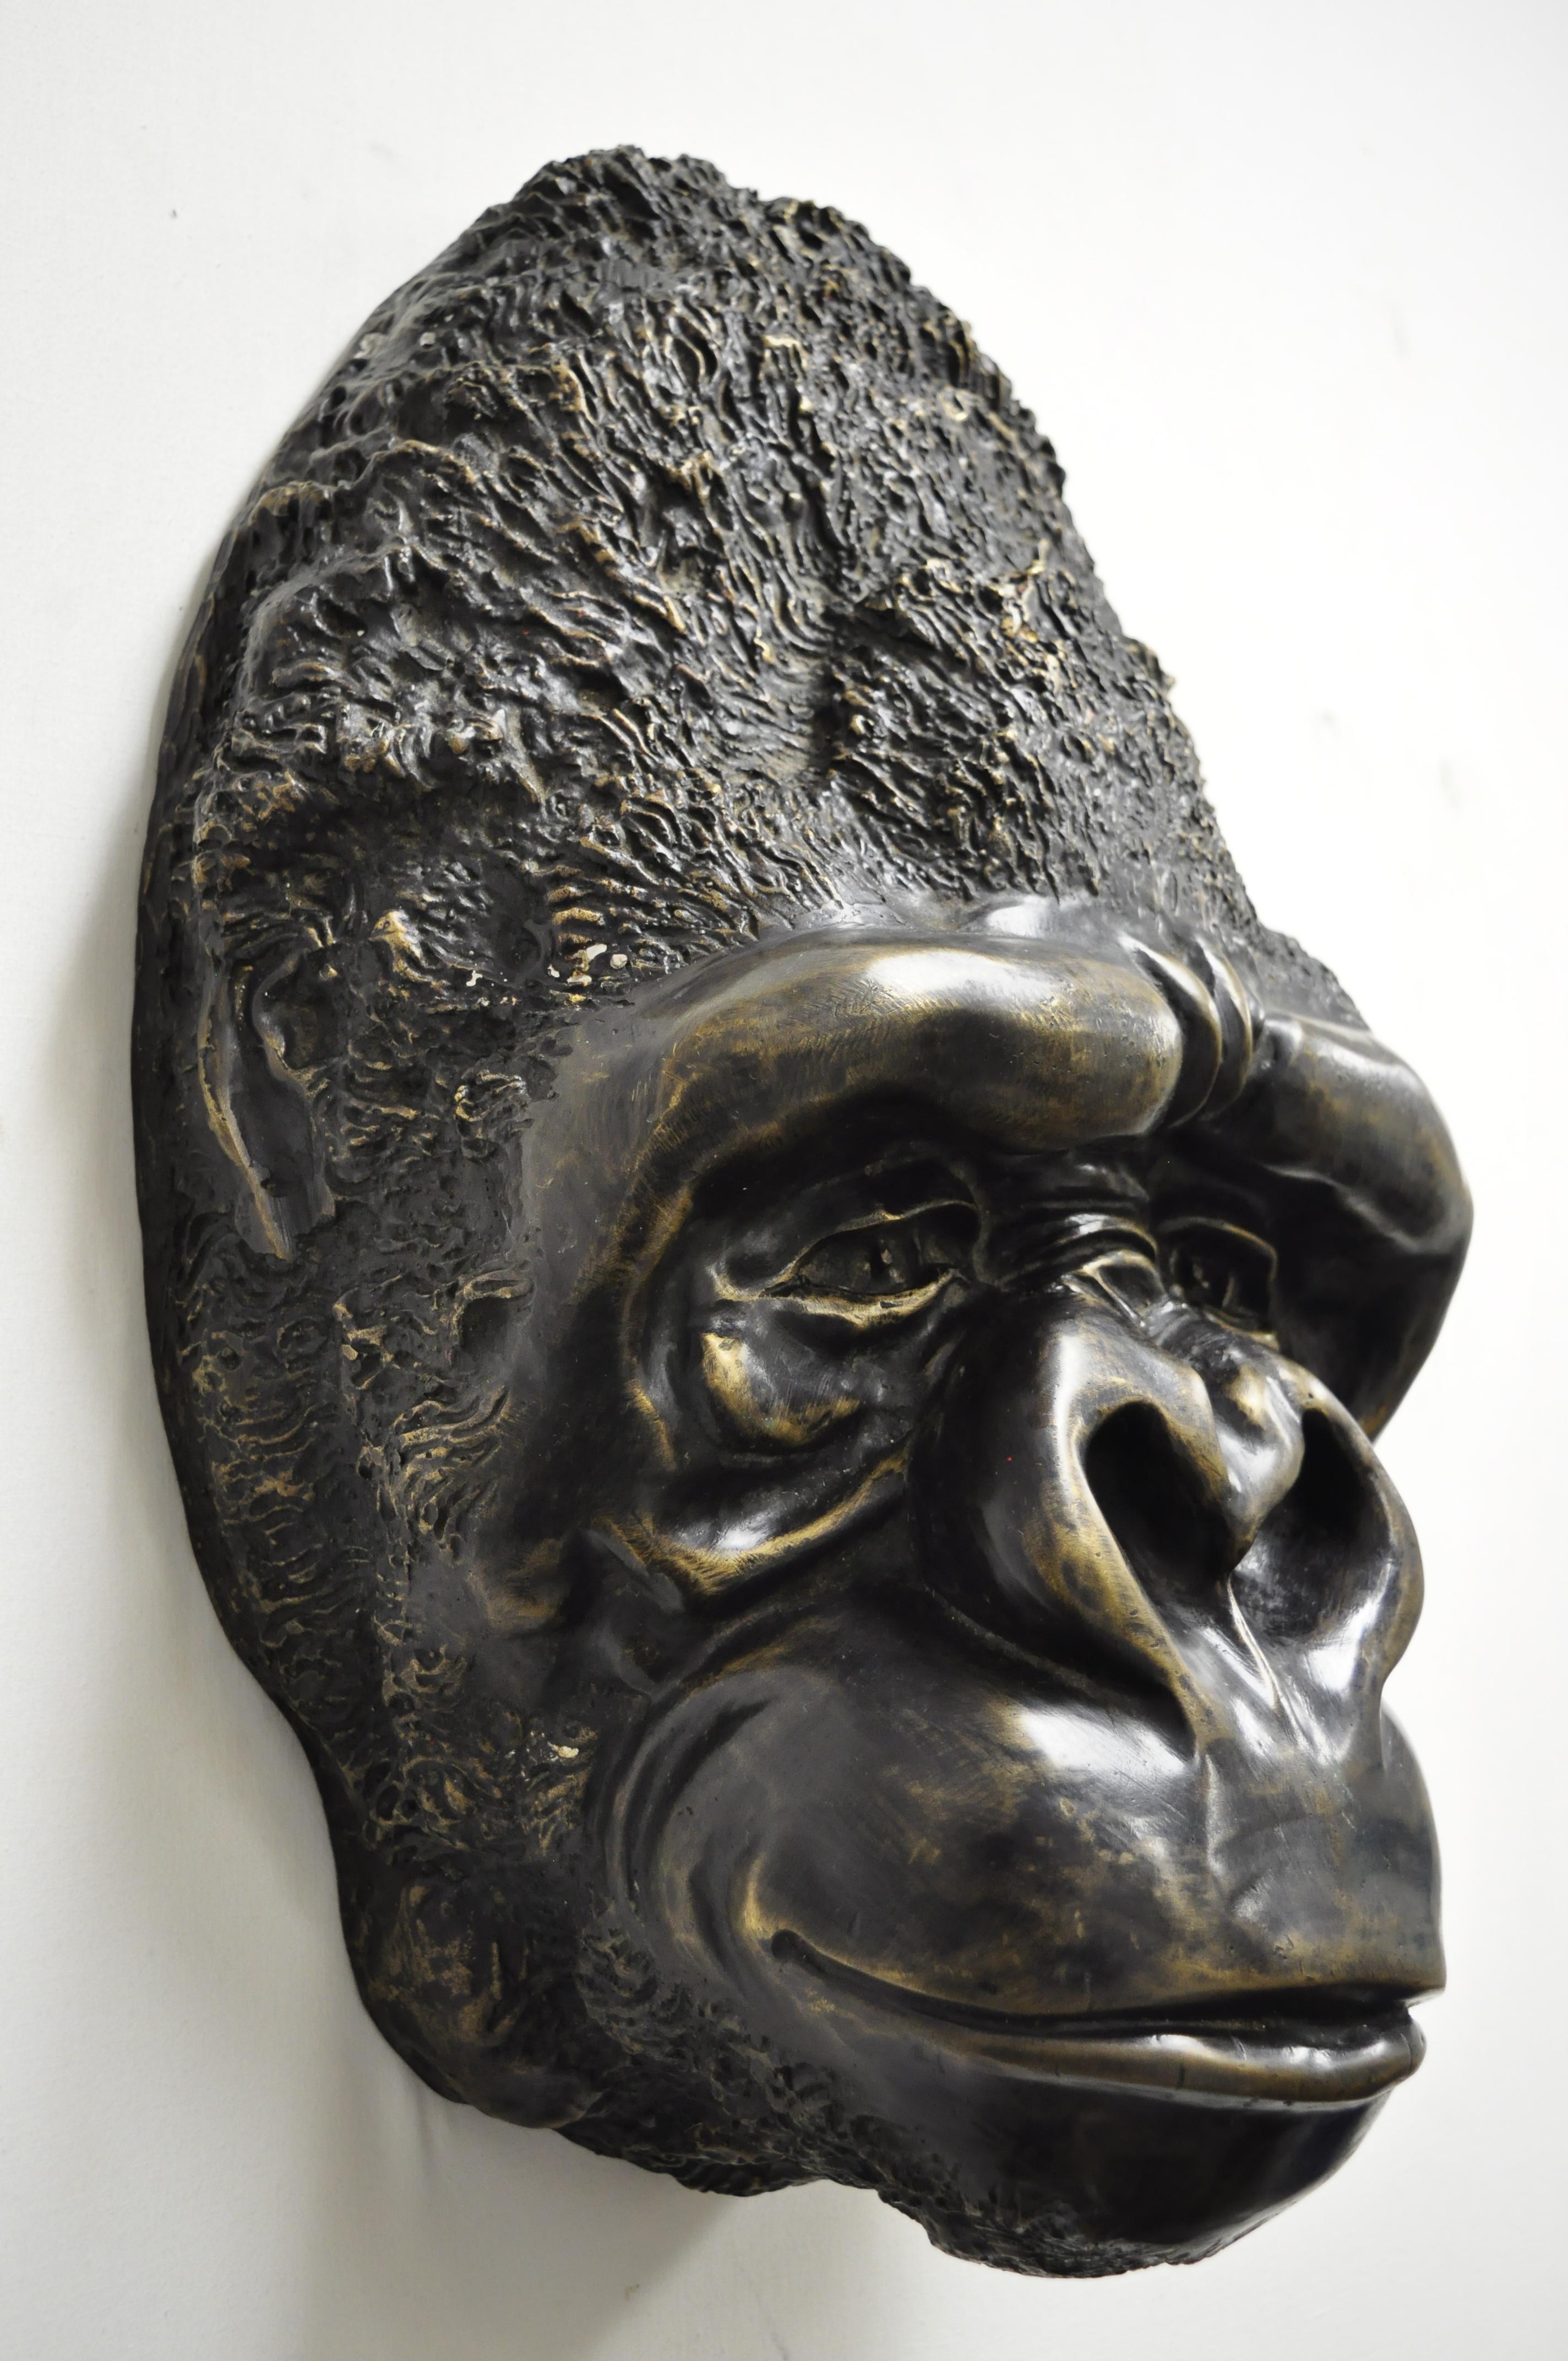 Large and impressive cast bronze gorilla head wall sculpture for a Taxidermy Collector (B). Item features heavy cast bronze construction, remarkable life-like details, large impressive size, holes to rear to hang on wall, weighs approximately 22lbs,